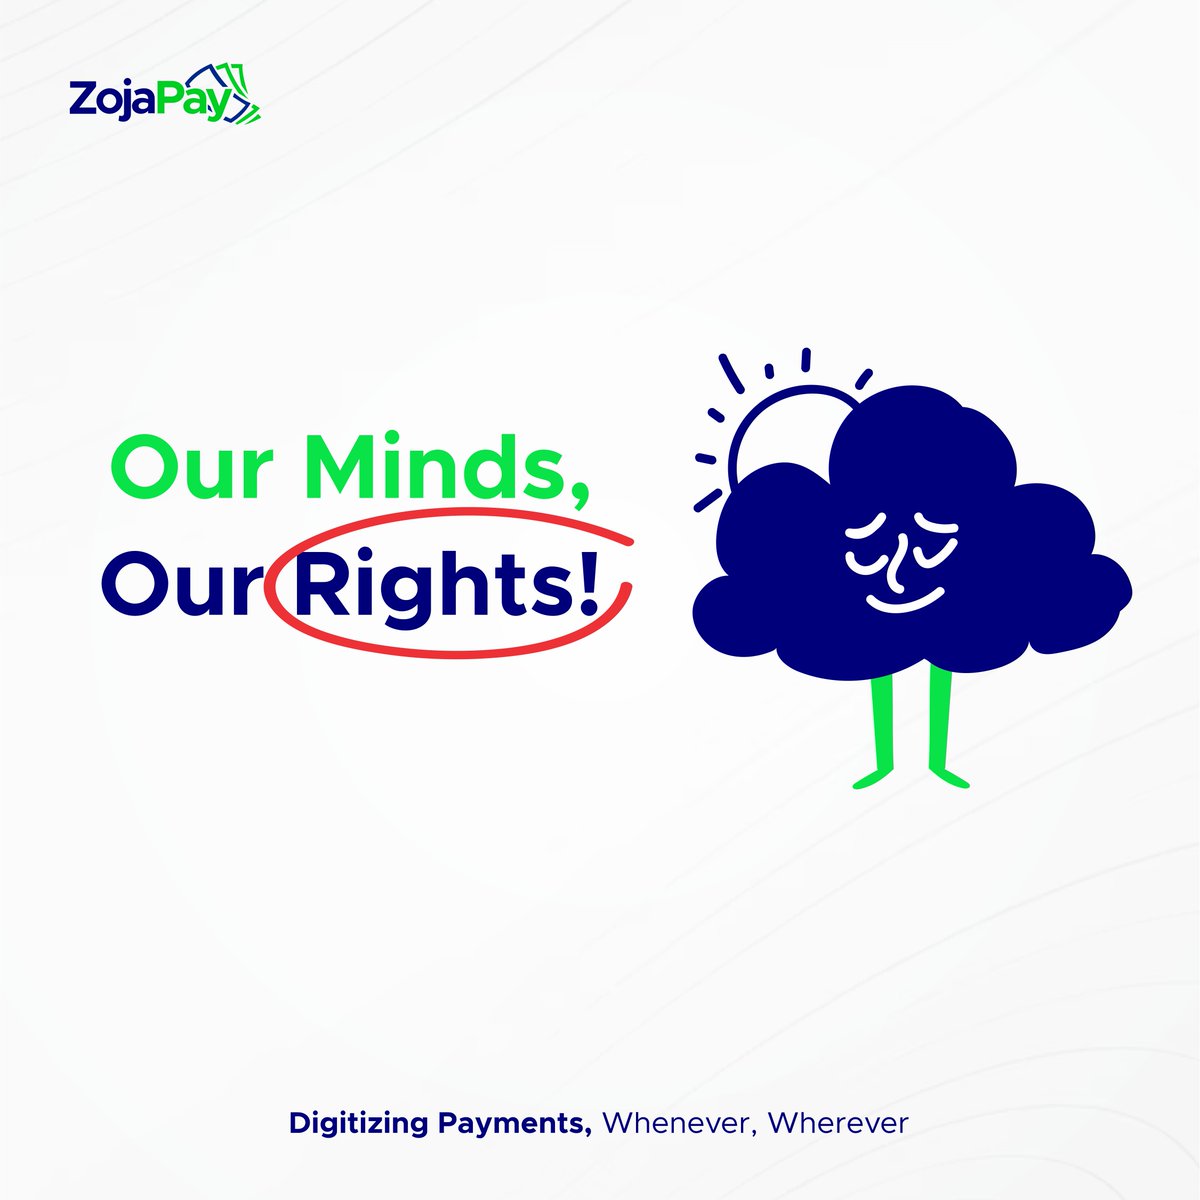 Your mental health is a priority.
Your happiness is essential.
Your self-care is a necessity.

Remember that.

#mindmatters #ZojapayCares #endthestigmaofmentalhealth